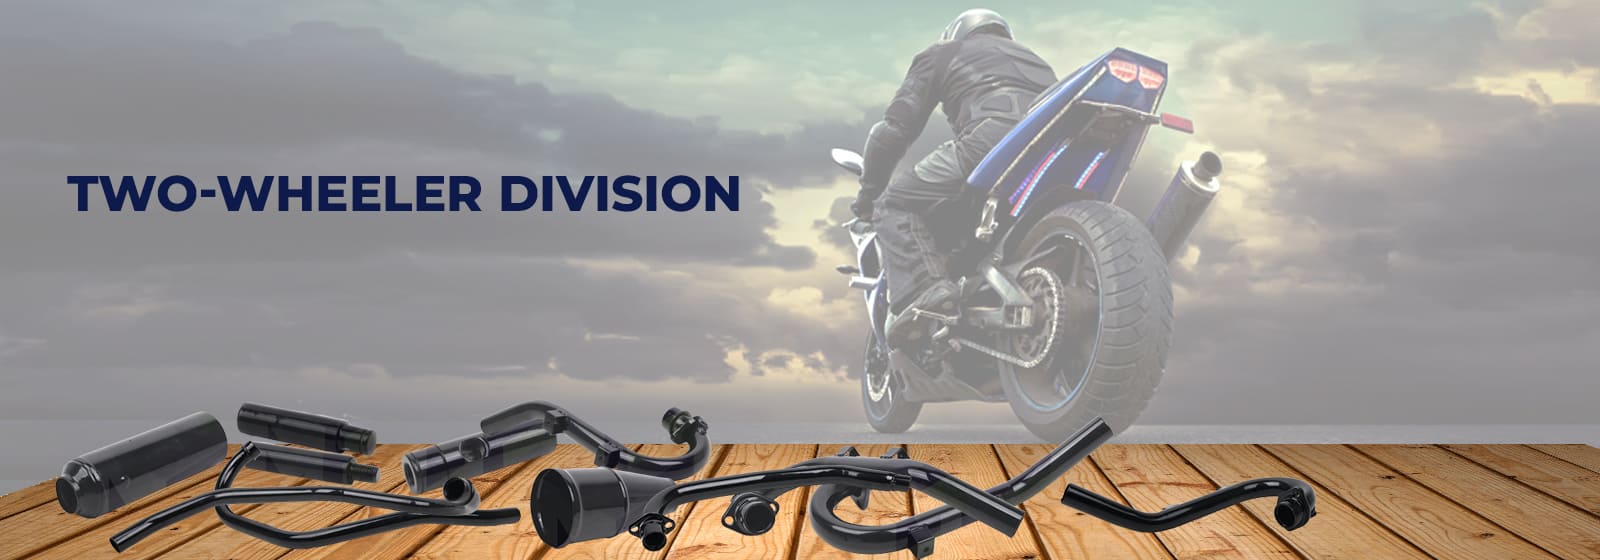 two wheeler division manufacturer